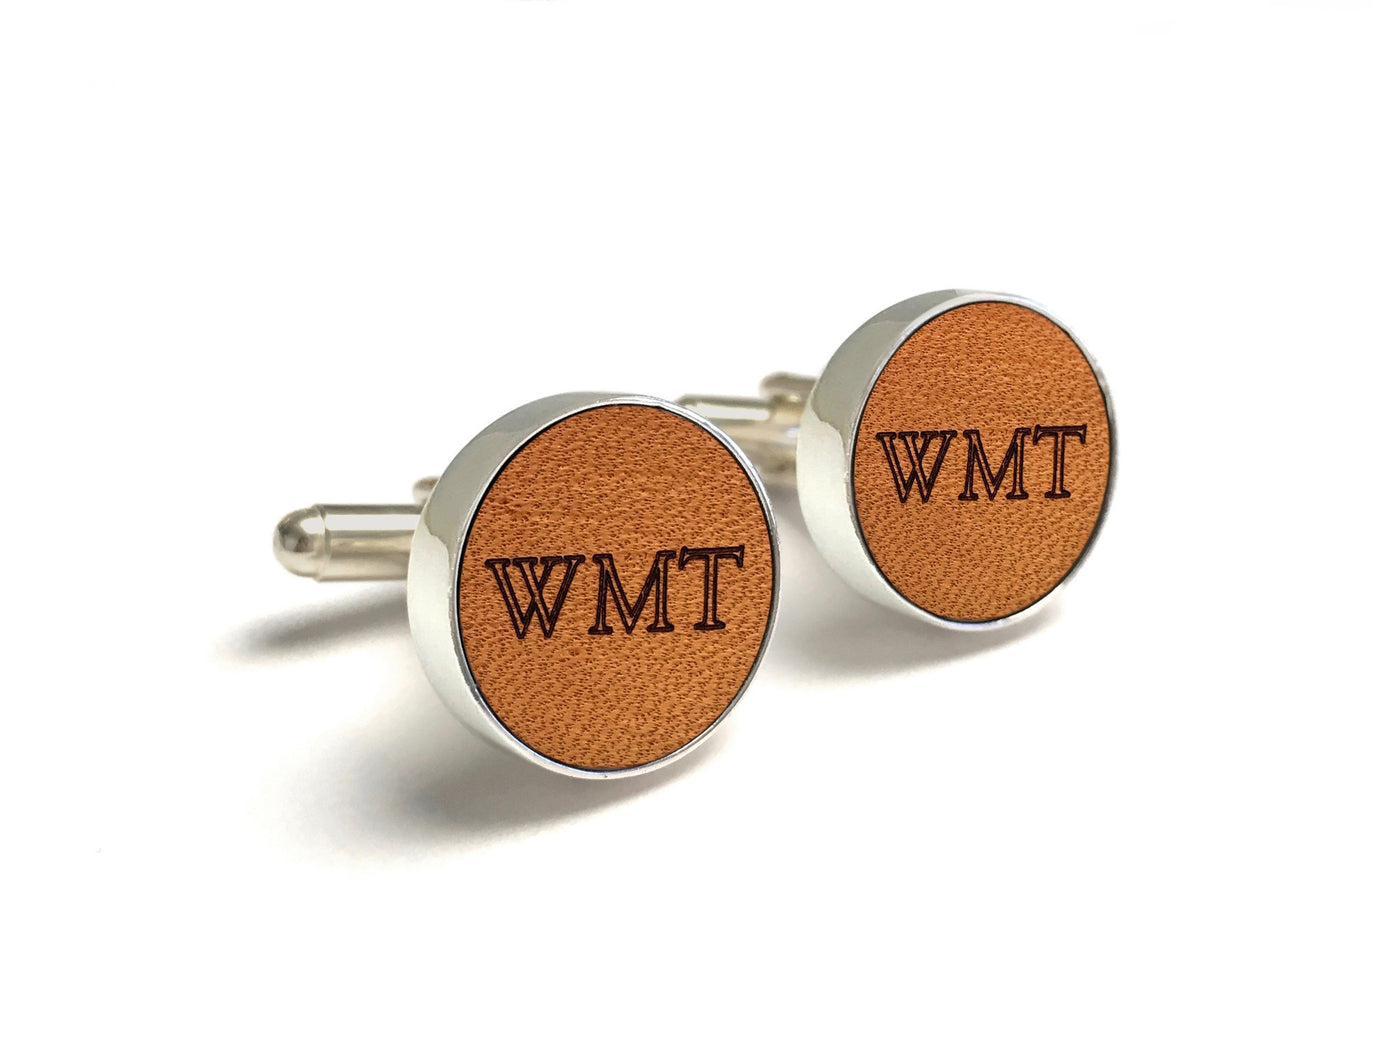 3 Year Anniversary Gifts For Him - Monogrammed Leather Cufflinks